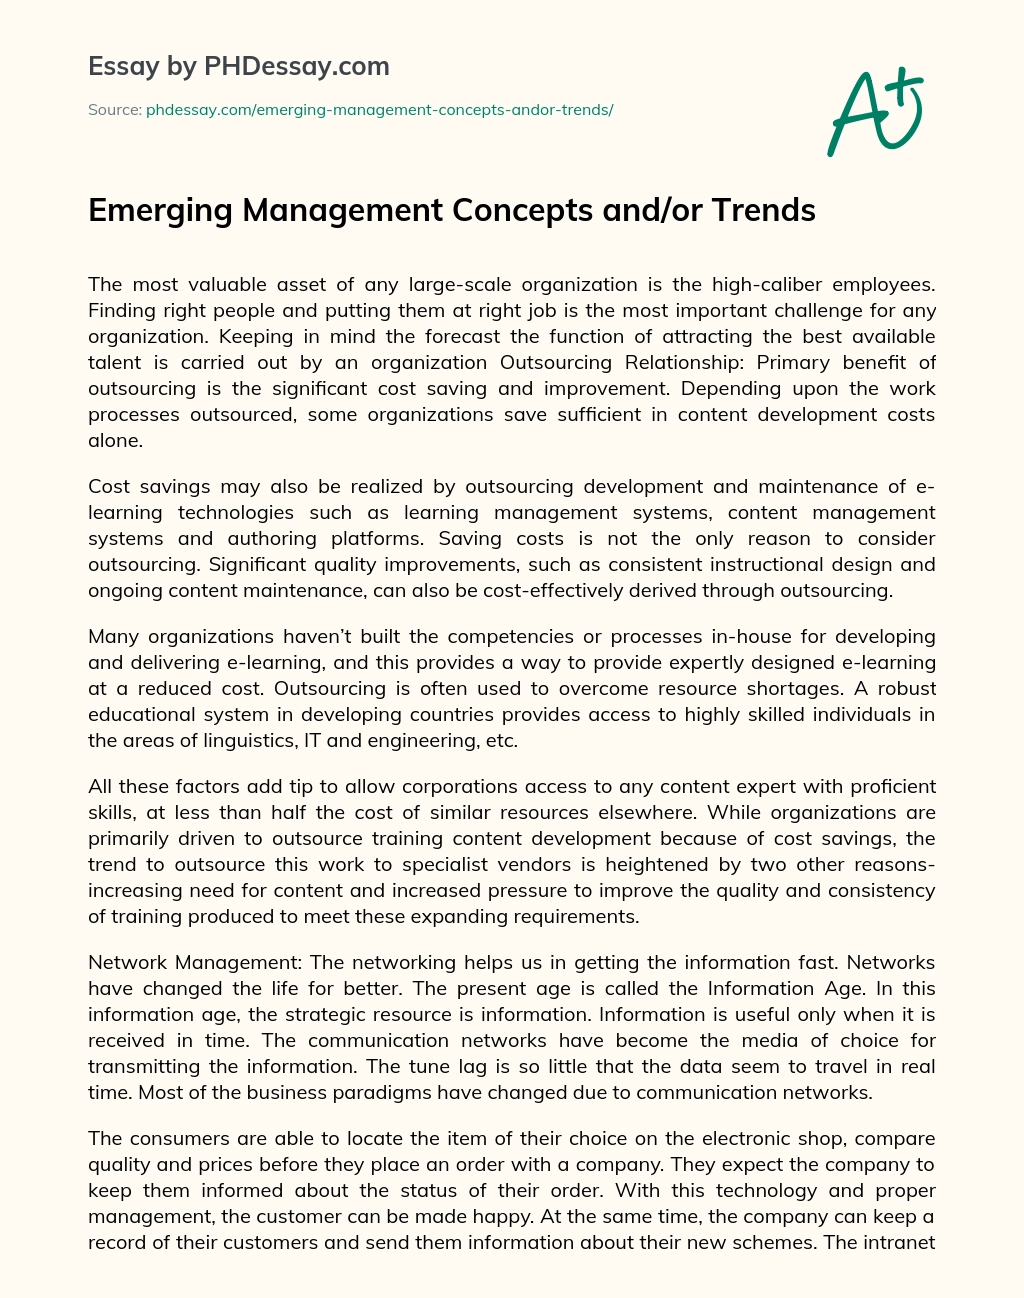 Emerging Management Concepts and/or Trends essay